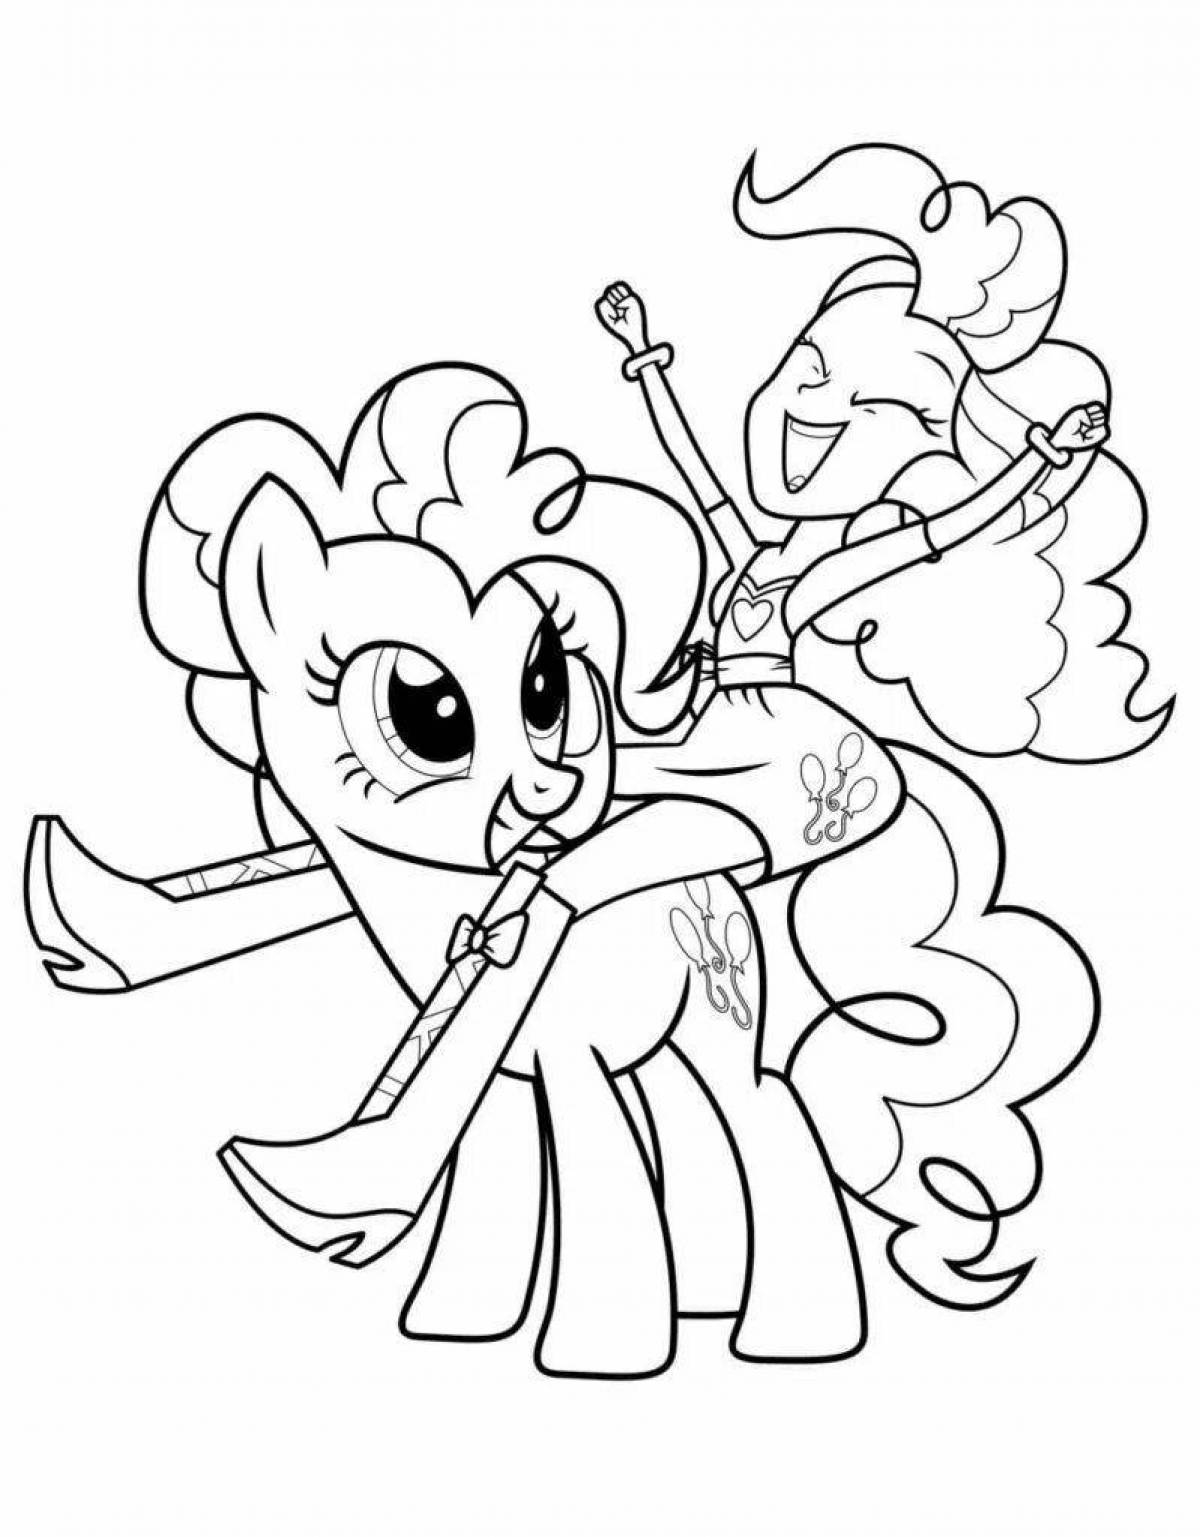 Pinkie Pie funny equestria girls coloring page